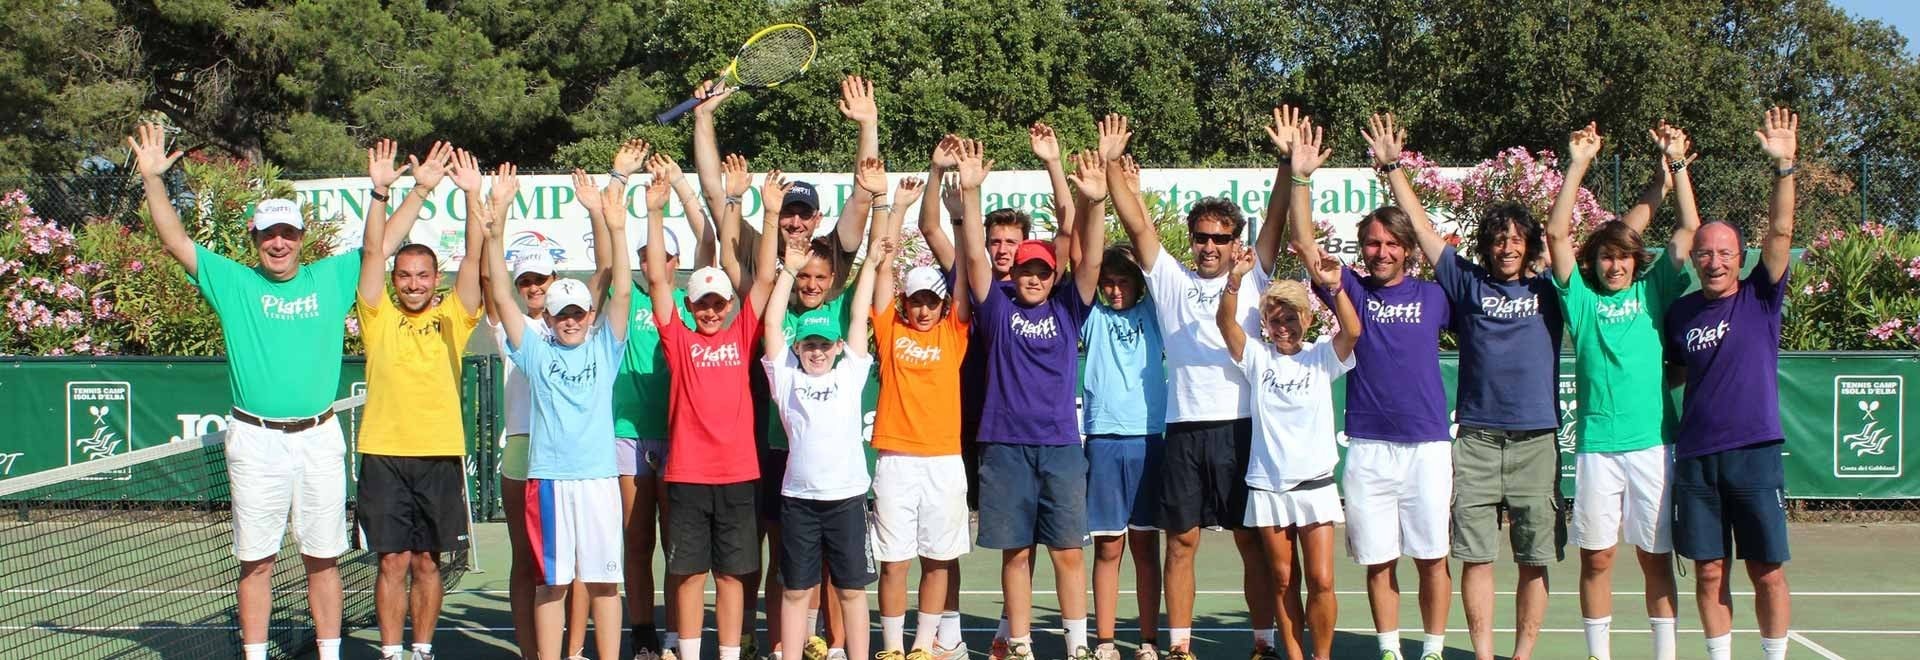 Tennis camps - Explore our Tennis Camps and Holidays